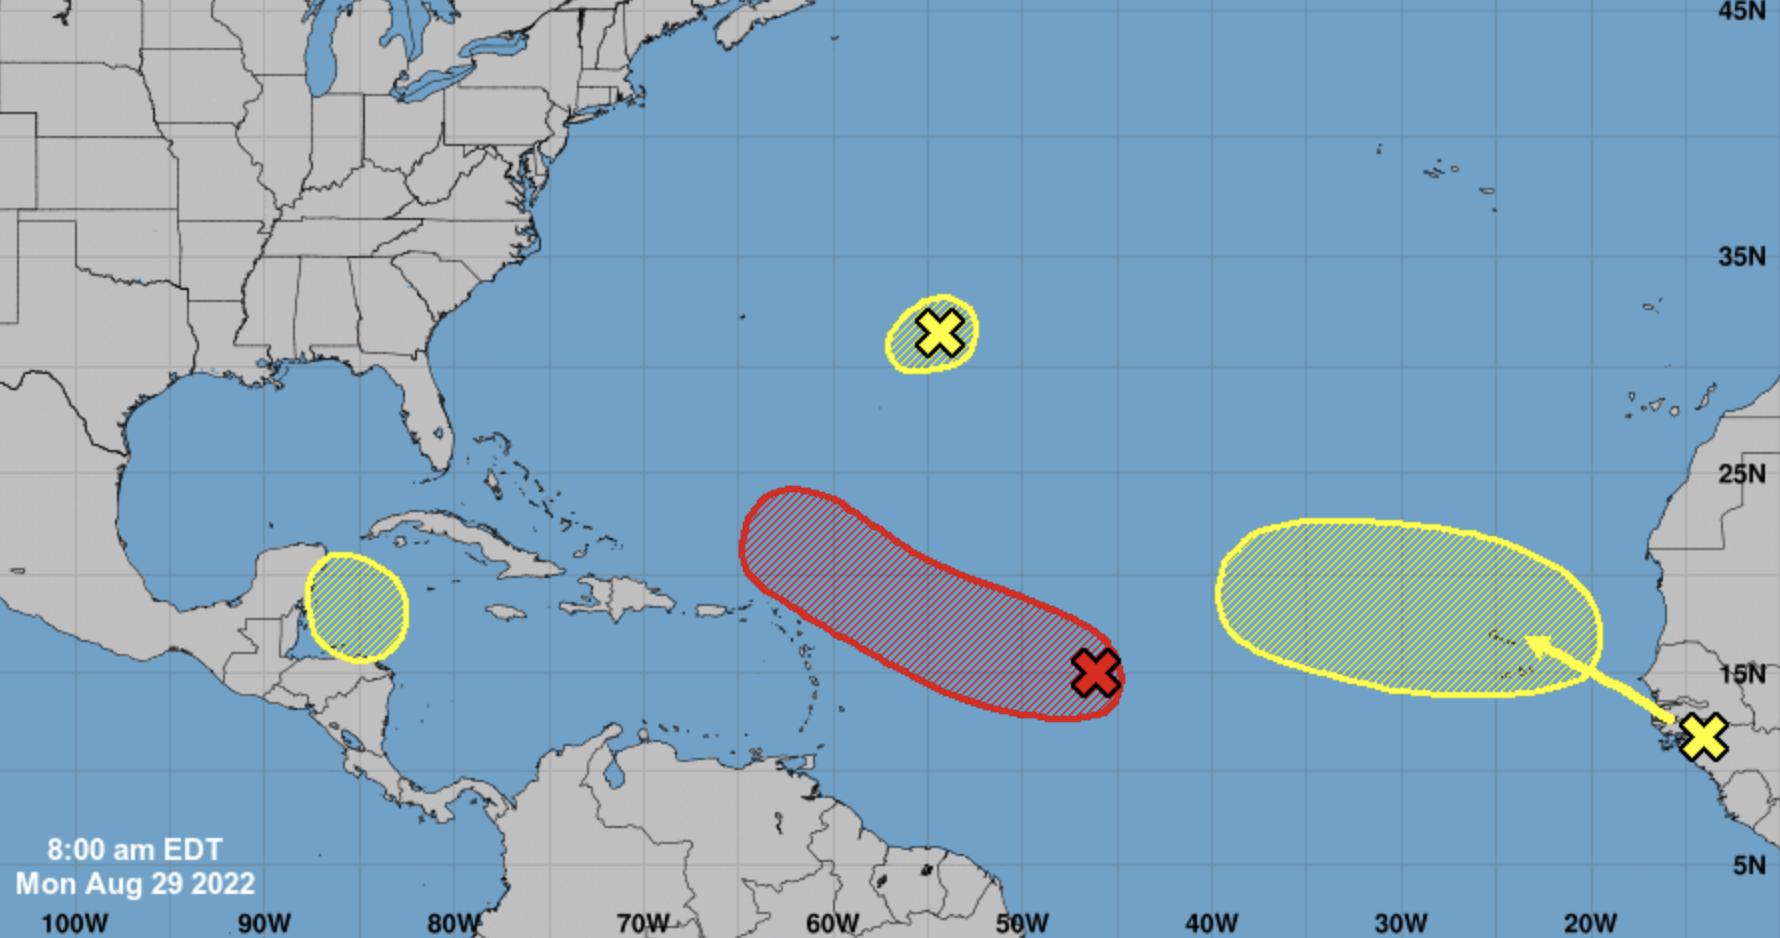 Current Disturbances and Five-Day Cyclone Formation.